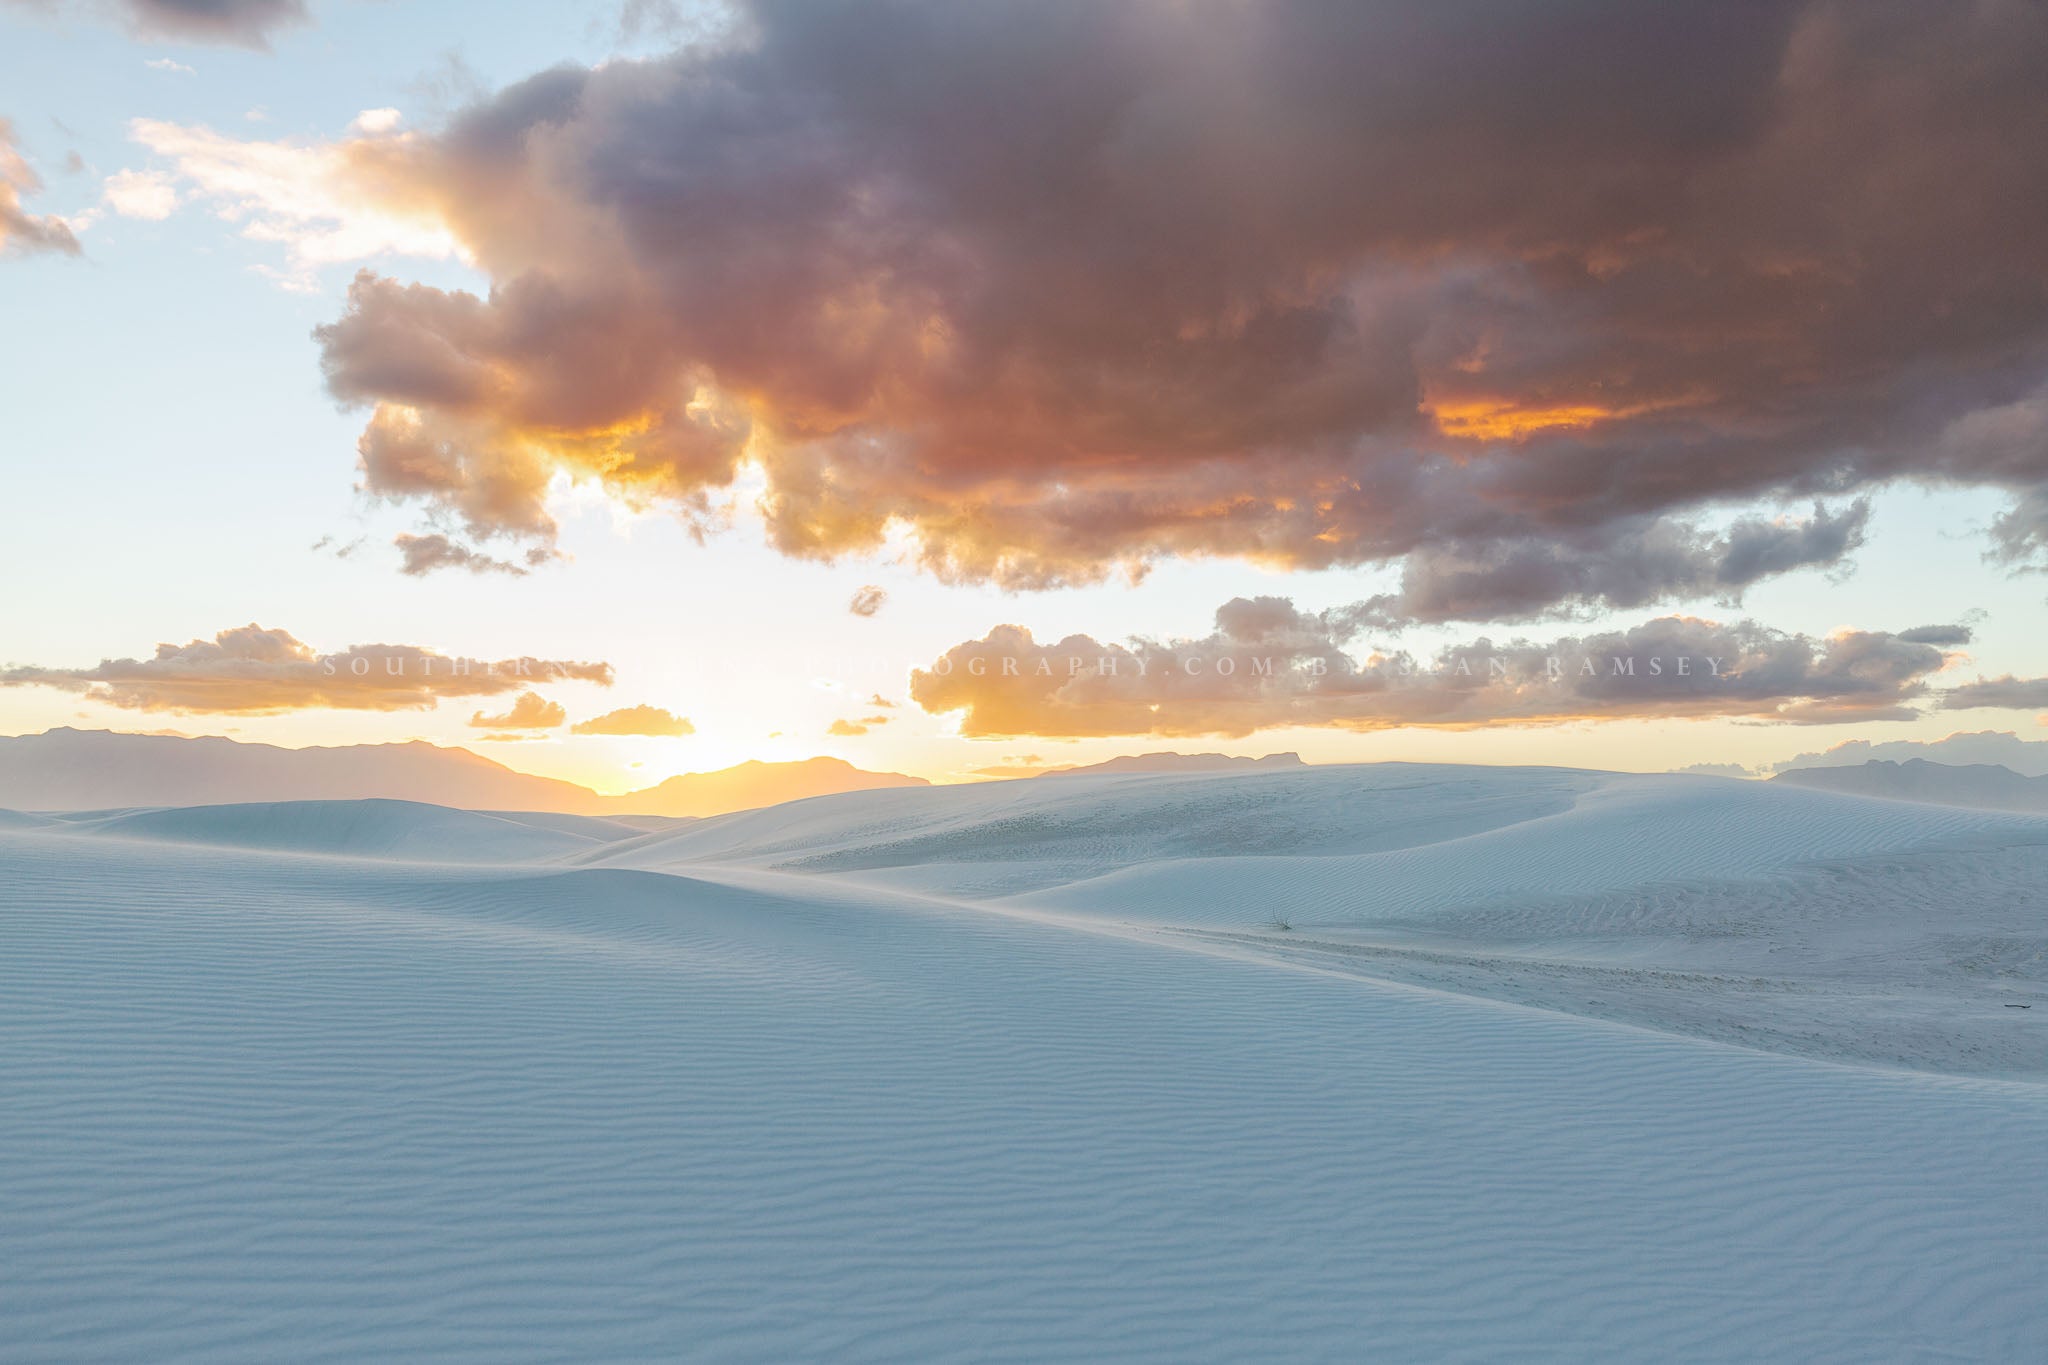 Desert photography print of a rose gold sunset taking place over dunes at White Sands National Park near Alamogordo, New Mexico by Sean Ramsey of Southern Plains Photography.